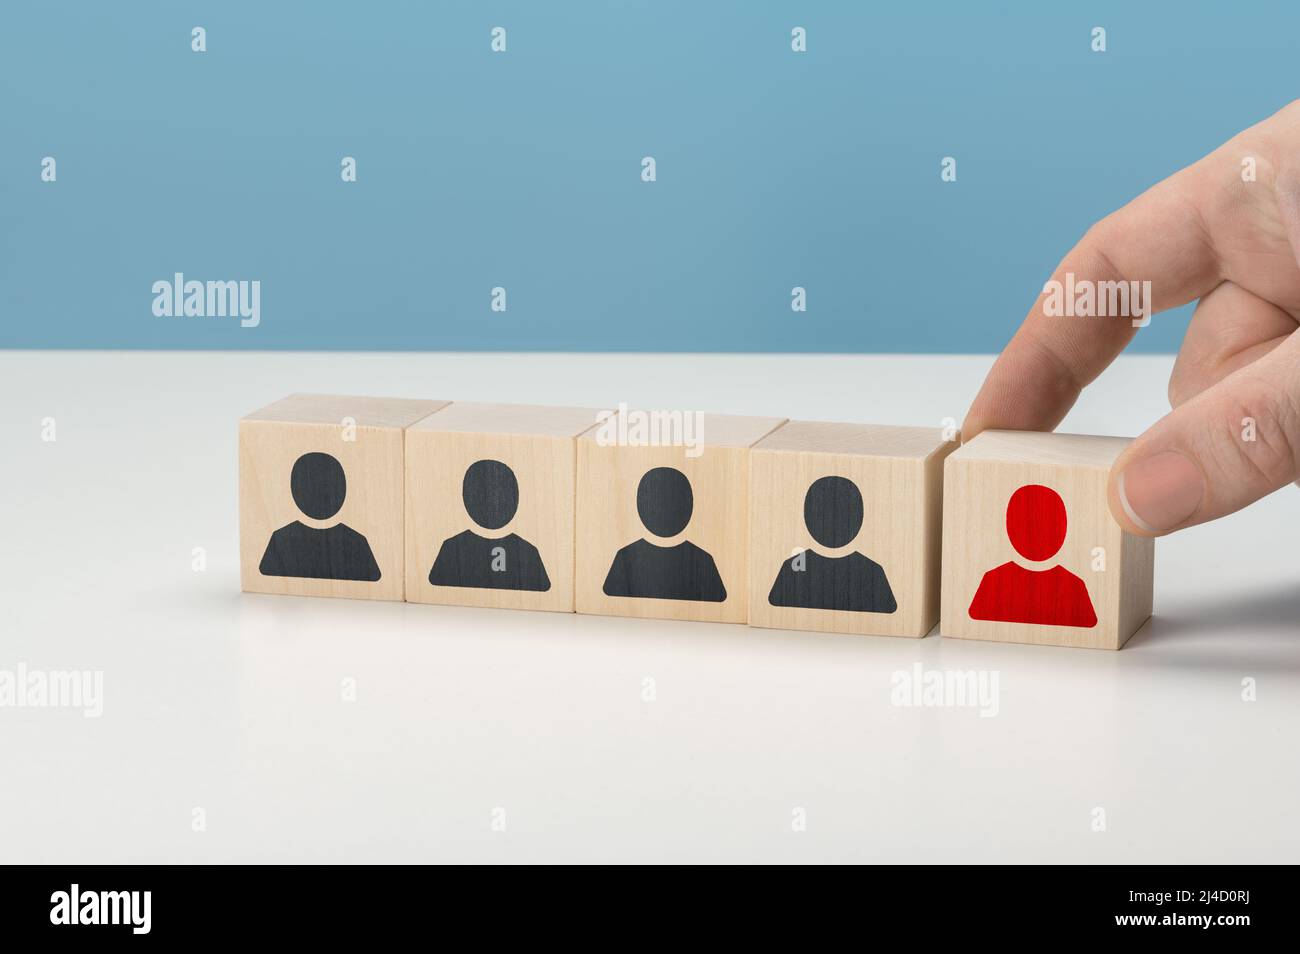 HR, Human resources and team completing. Human Resources and personnel hiring concept. Employees are represented by wooden cubes with icons. Business Stock Photo